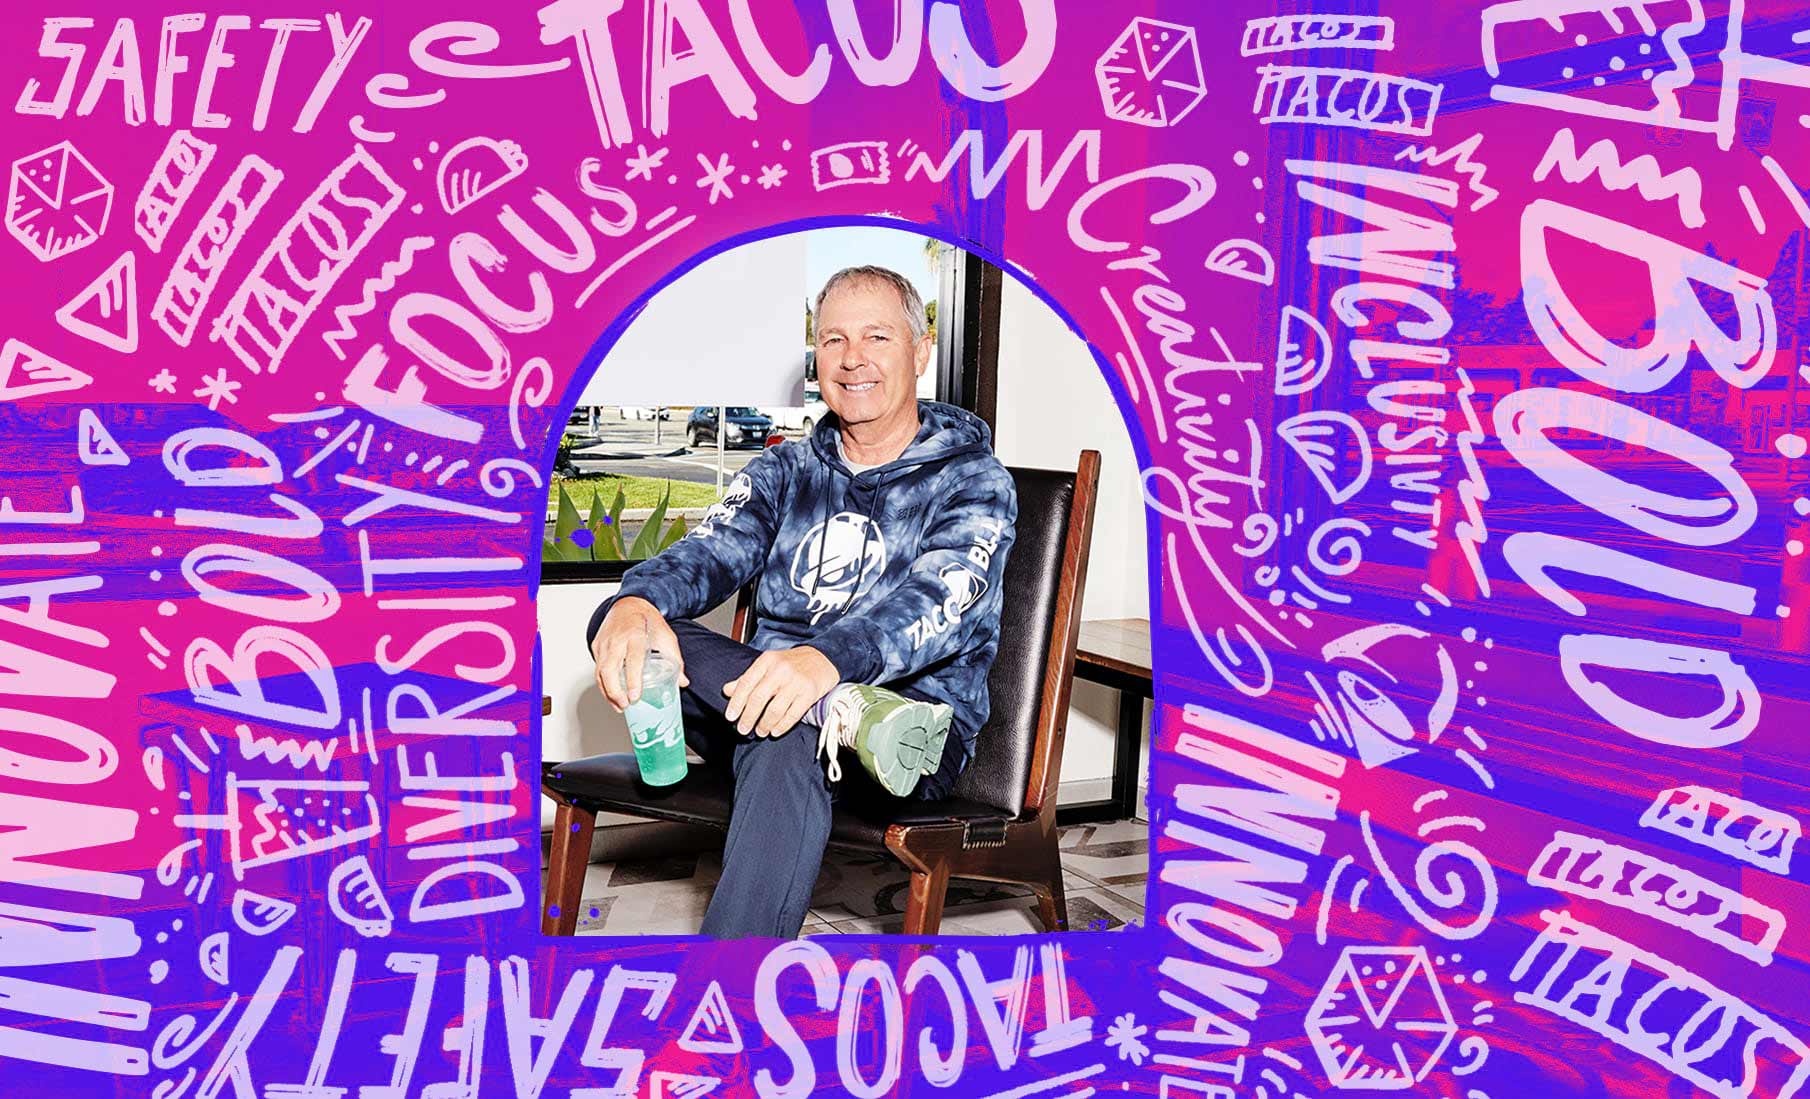 Taco Bell’s Former CEO, Greg Creed, Reflects On How to Build an Ownable Company Culture that Inspires Innovation